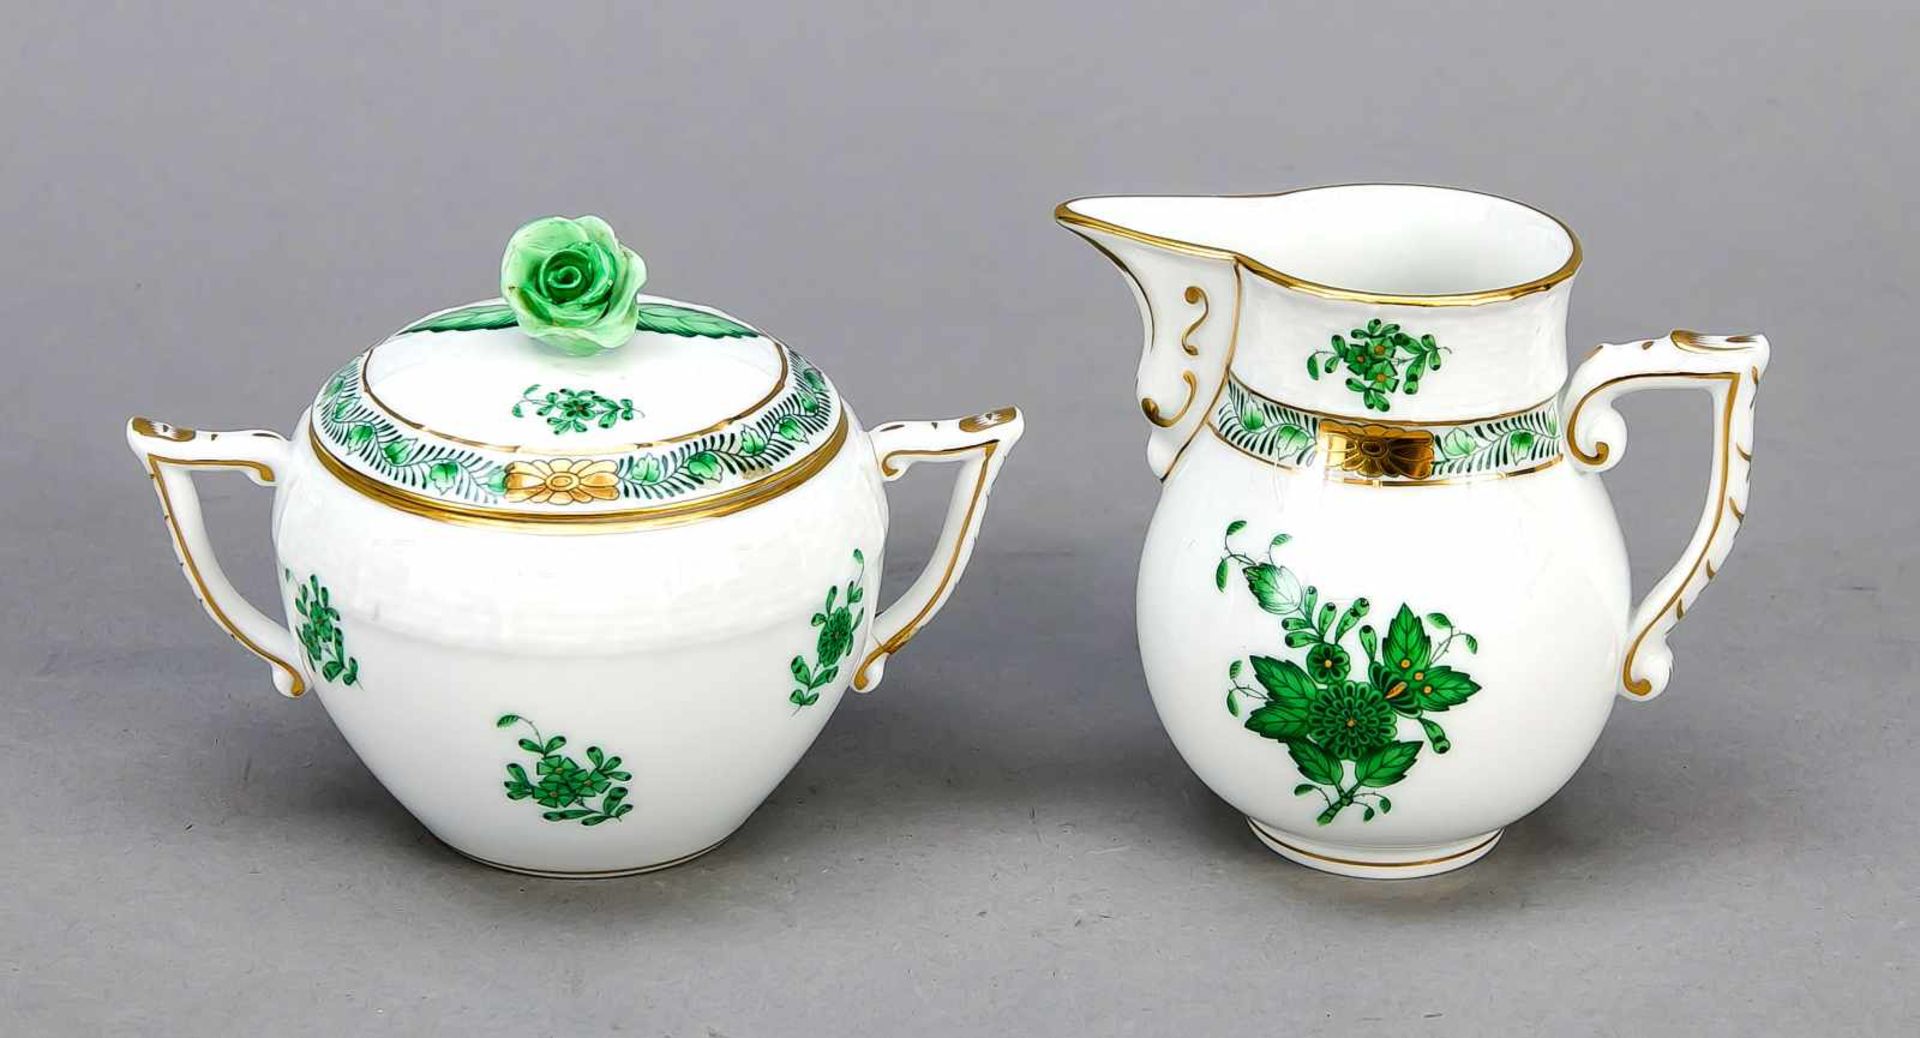 Sugar and cream, Herend, after 1967, form Ozier, decor Apponyi in green, gold-plated,model no. 695